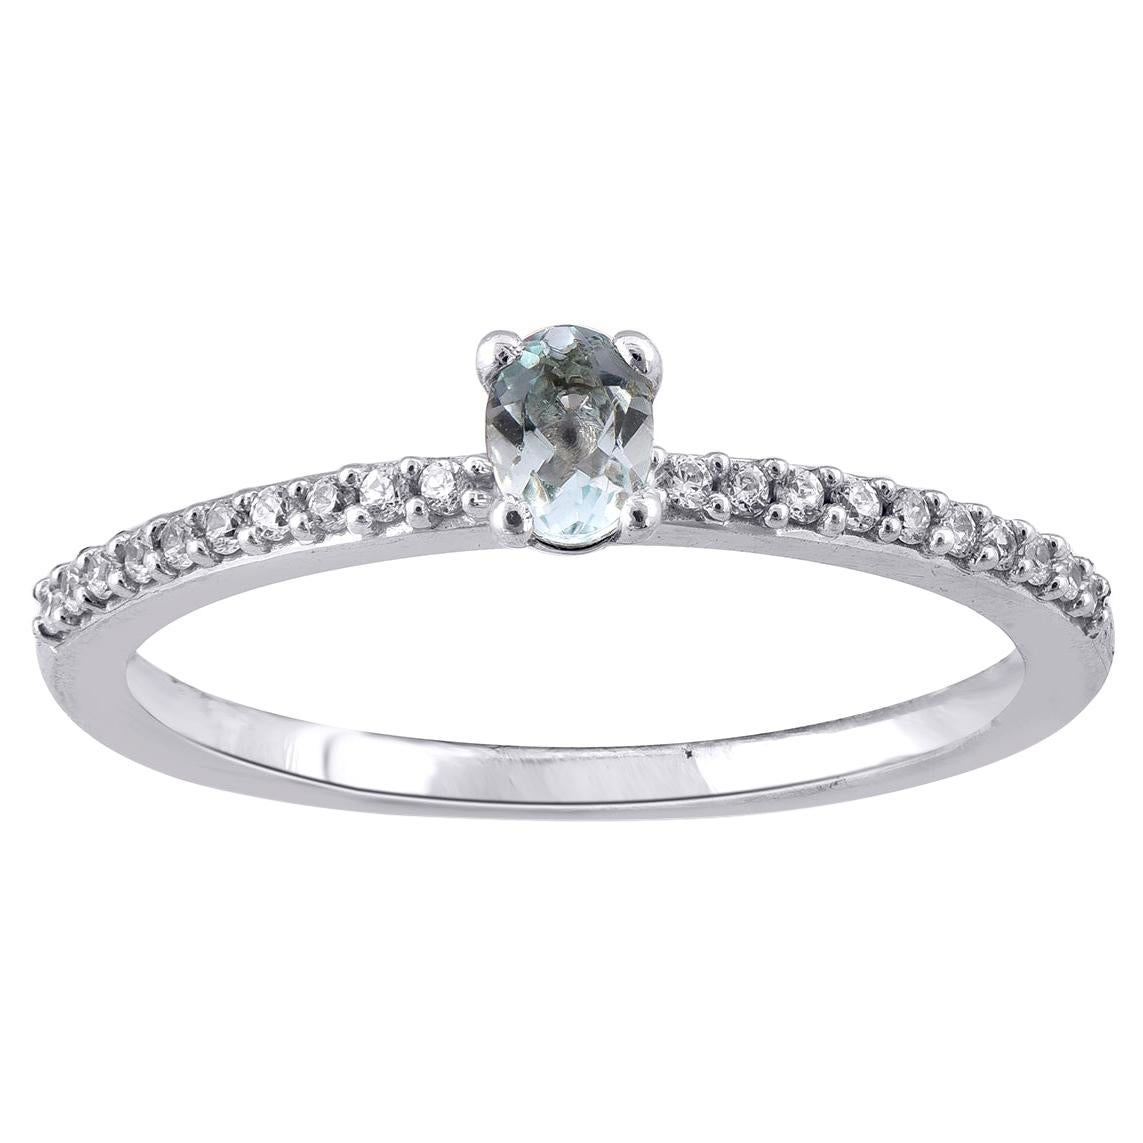 TJD 0.10 Carat 14 karat White Gold Round and Oval cut Aquamarine Engagement ring For Sale